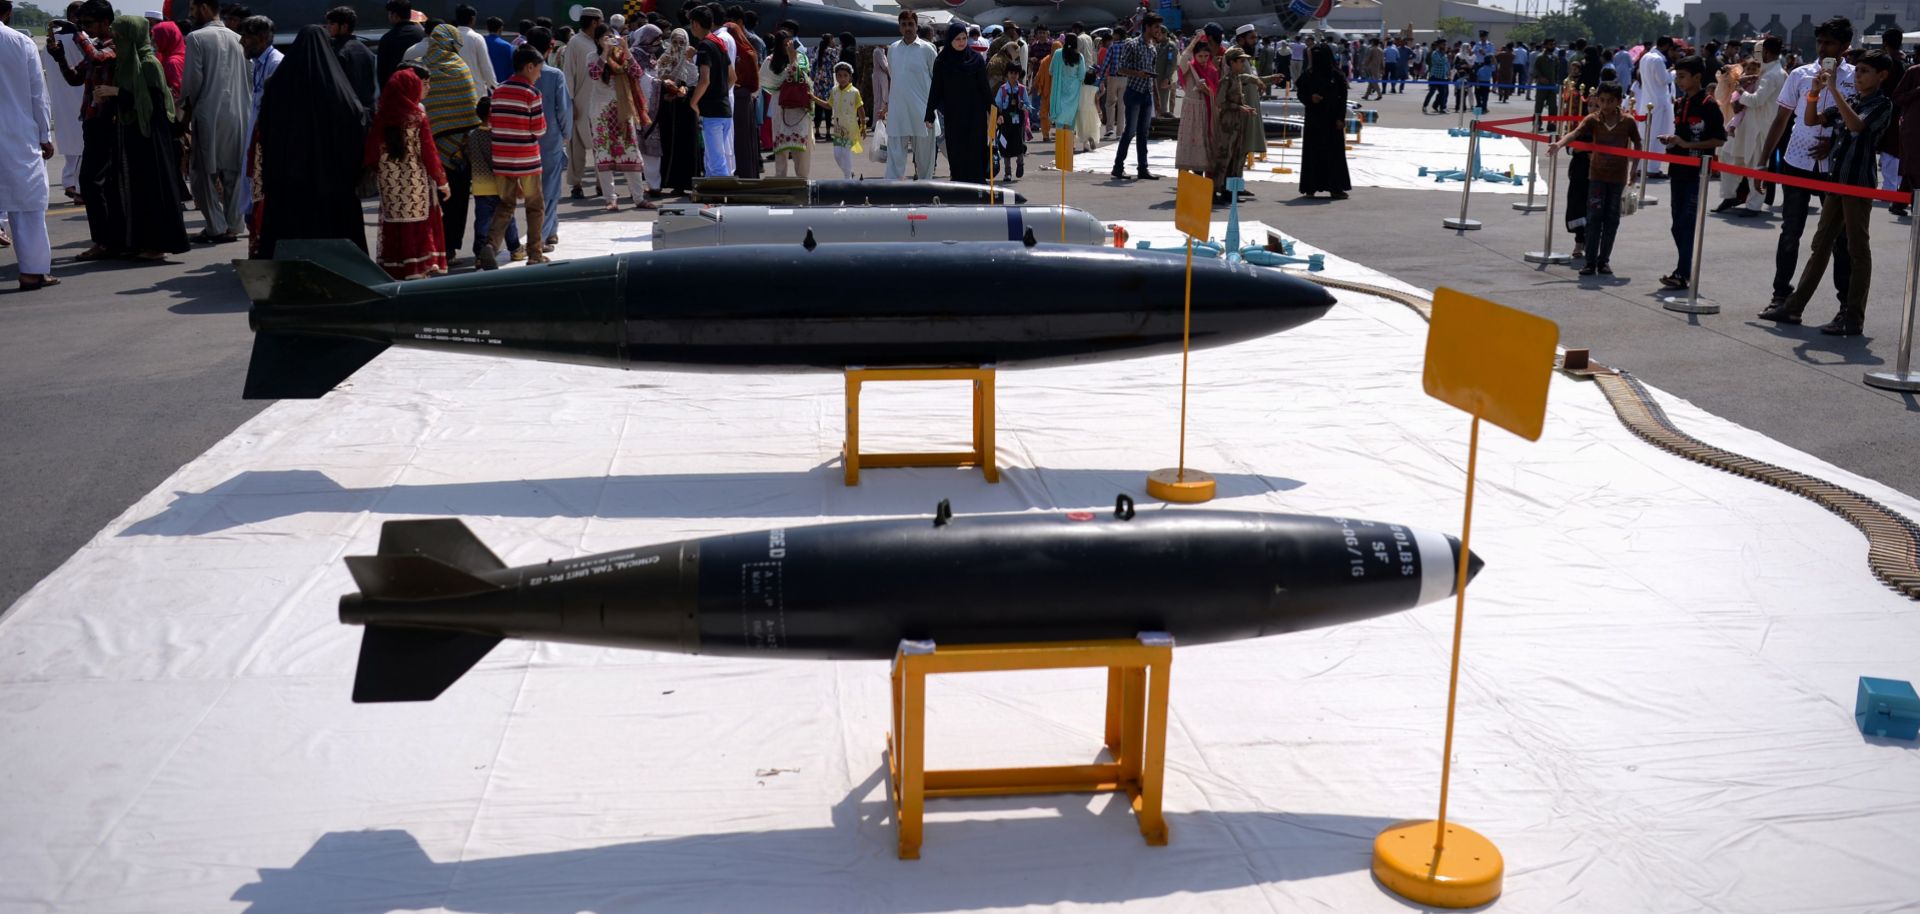 The Pakistani military displays some of its missiles at the Nur Khan air base on Sept. 6, 2017.